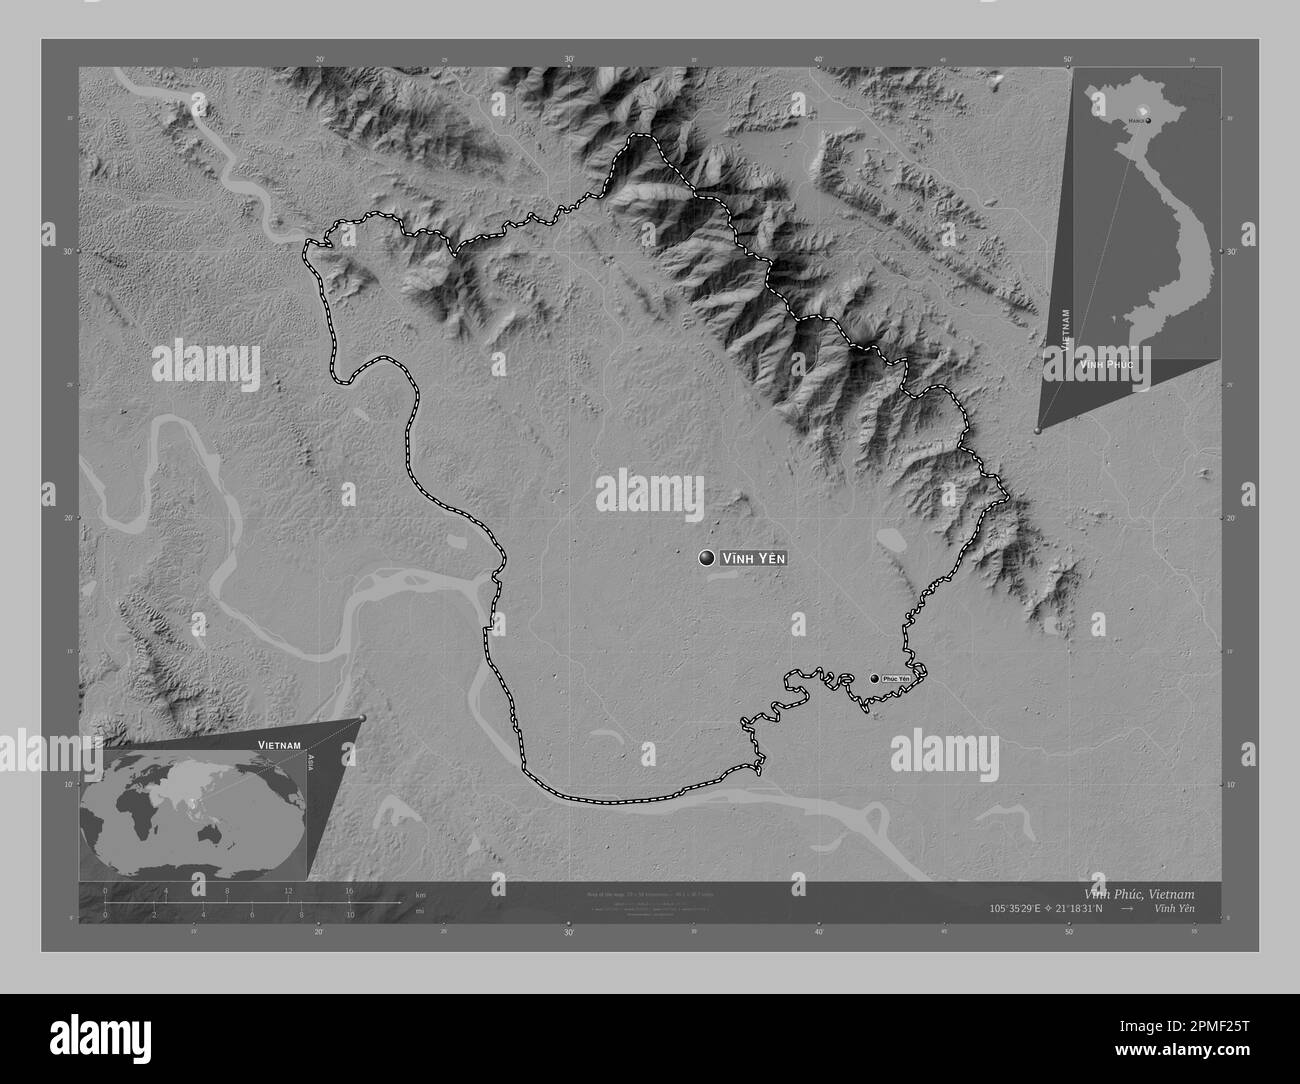 Vinh Phuc Province Of Vietnam Grayscale Elevation Map With Lakes And Rivers Locations And Names Of Major Cities Of The Region Corner Auxiliary Loc 2PMF25T 